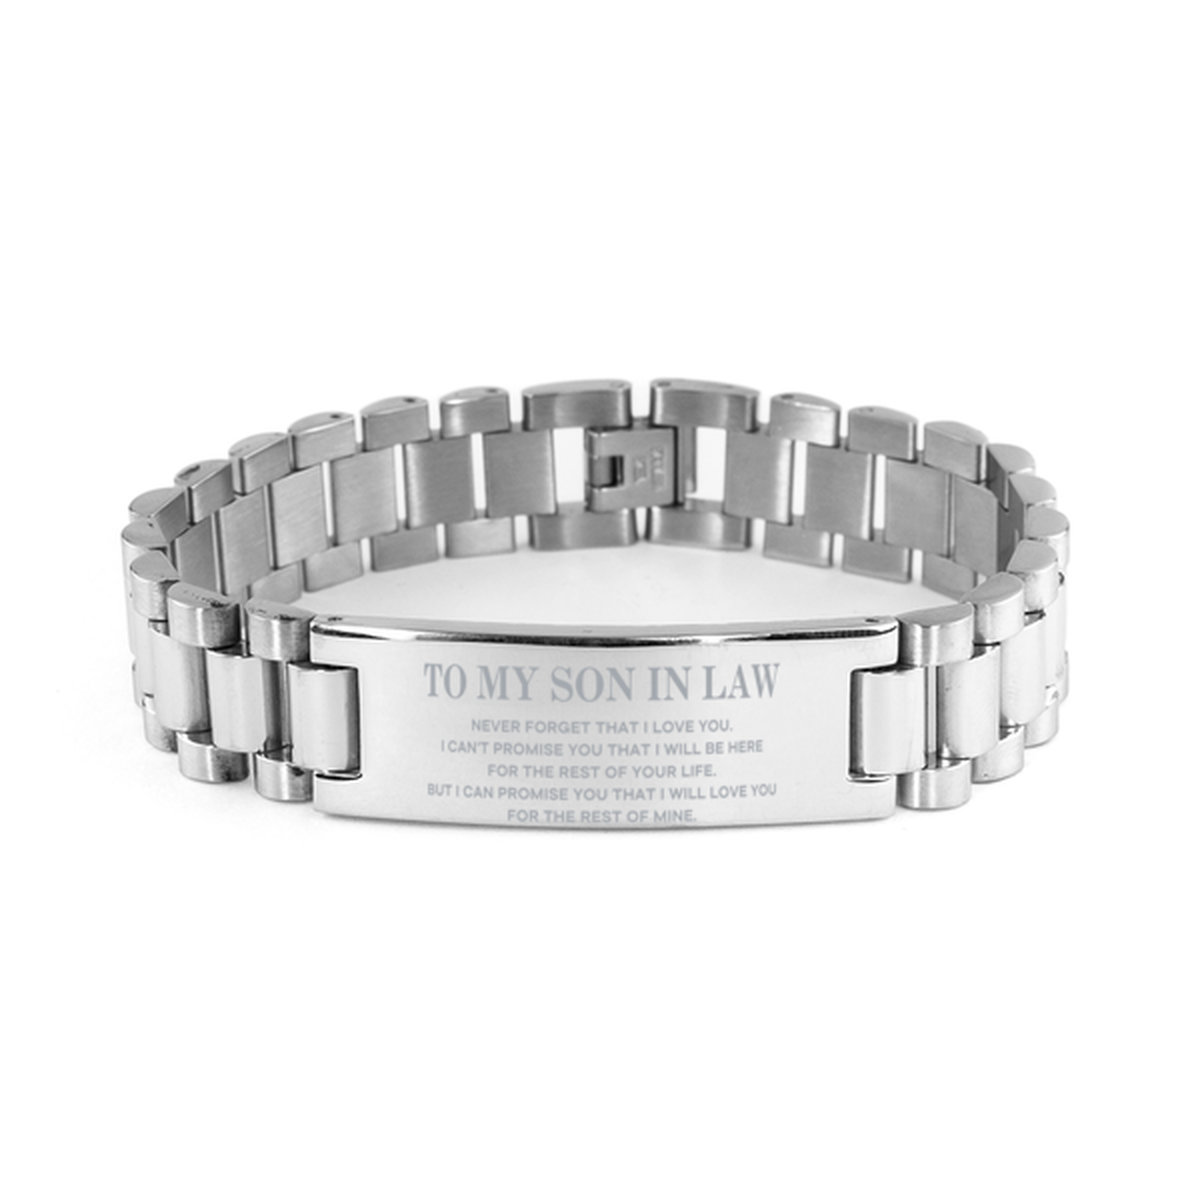 To My Son In Law Gifts, I will love you for the rest of mine, Love Son In Law Bracelet, Birthday Christmas Unique Ladder Stainless Steel Bracelet For Son In Law